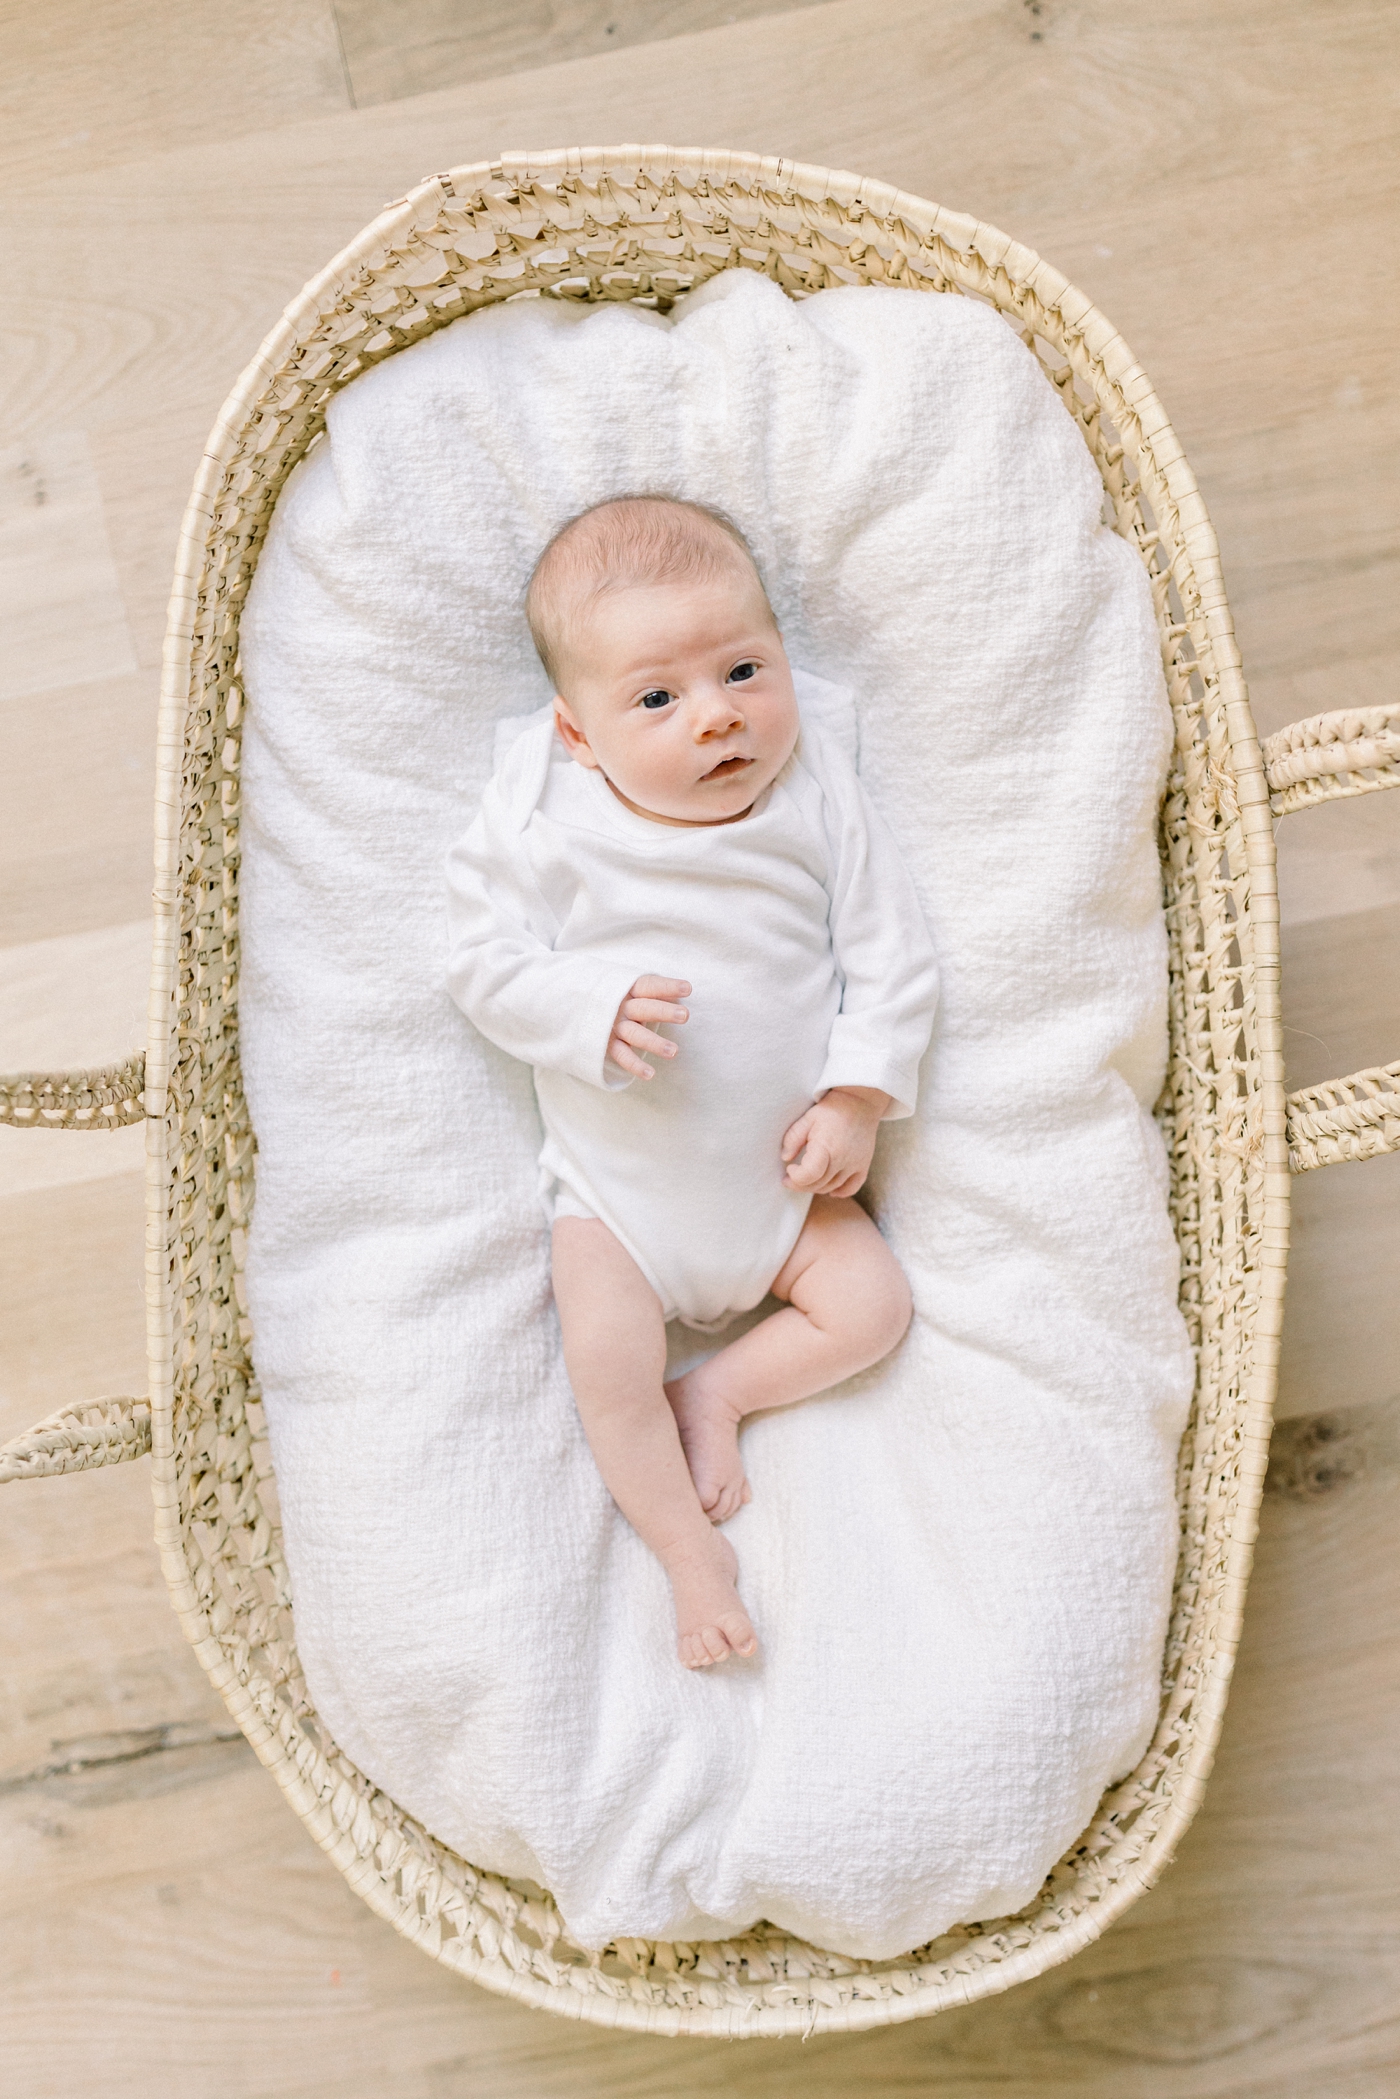 Baby in a Moses basket looking at the camera | Photo by Caitlyn Motycka Photography.